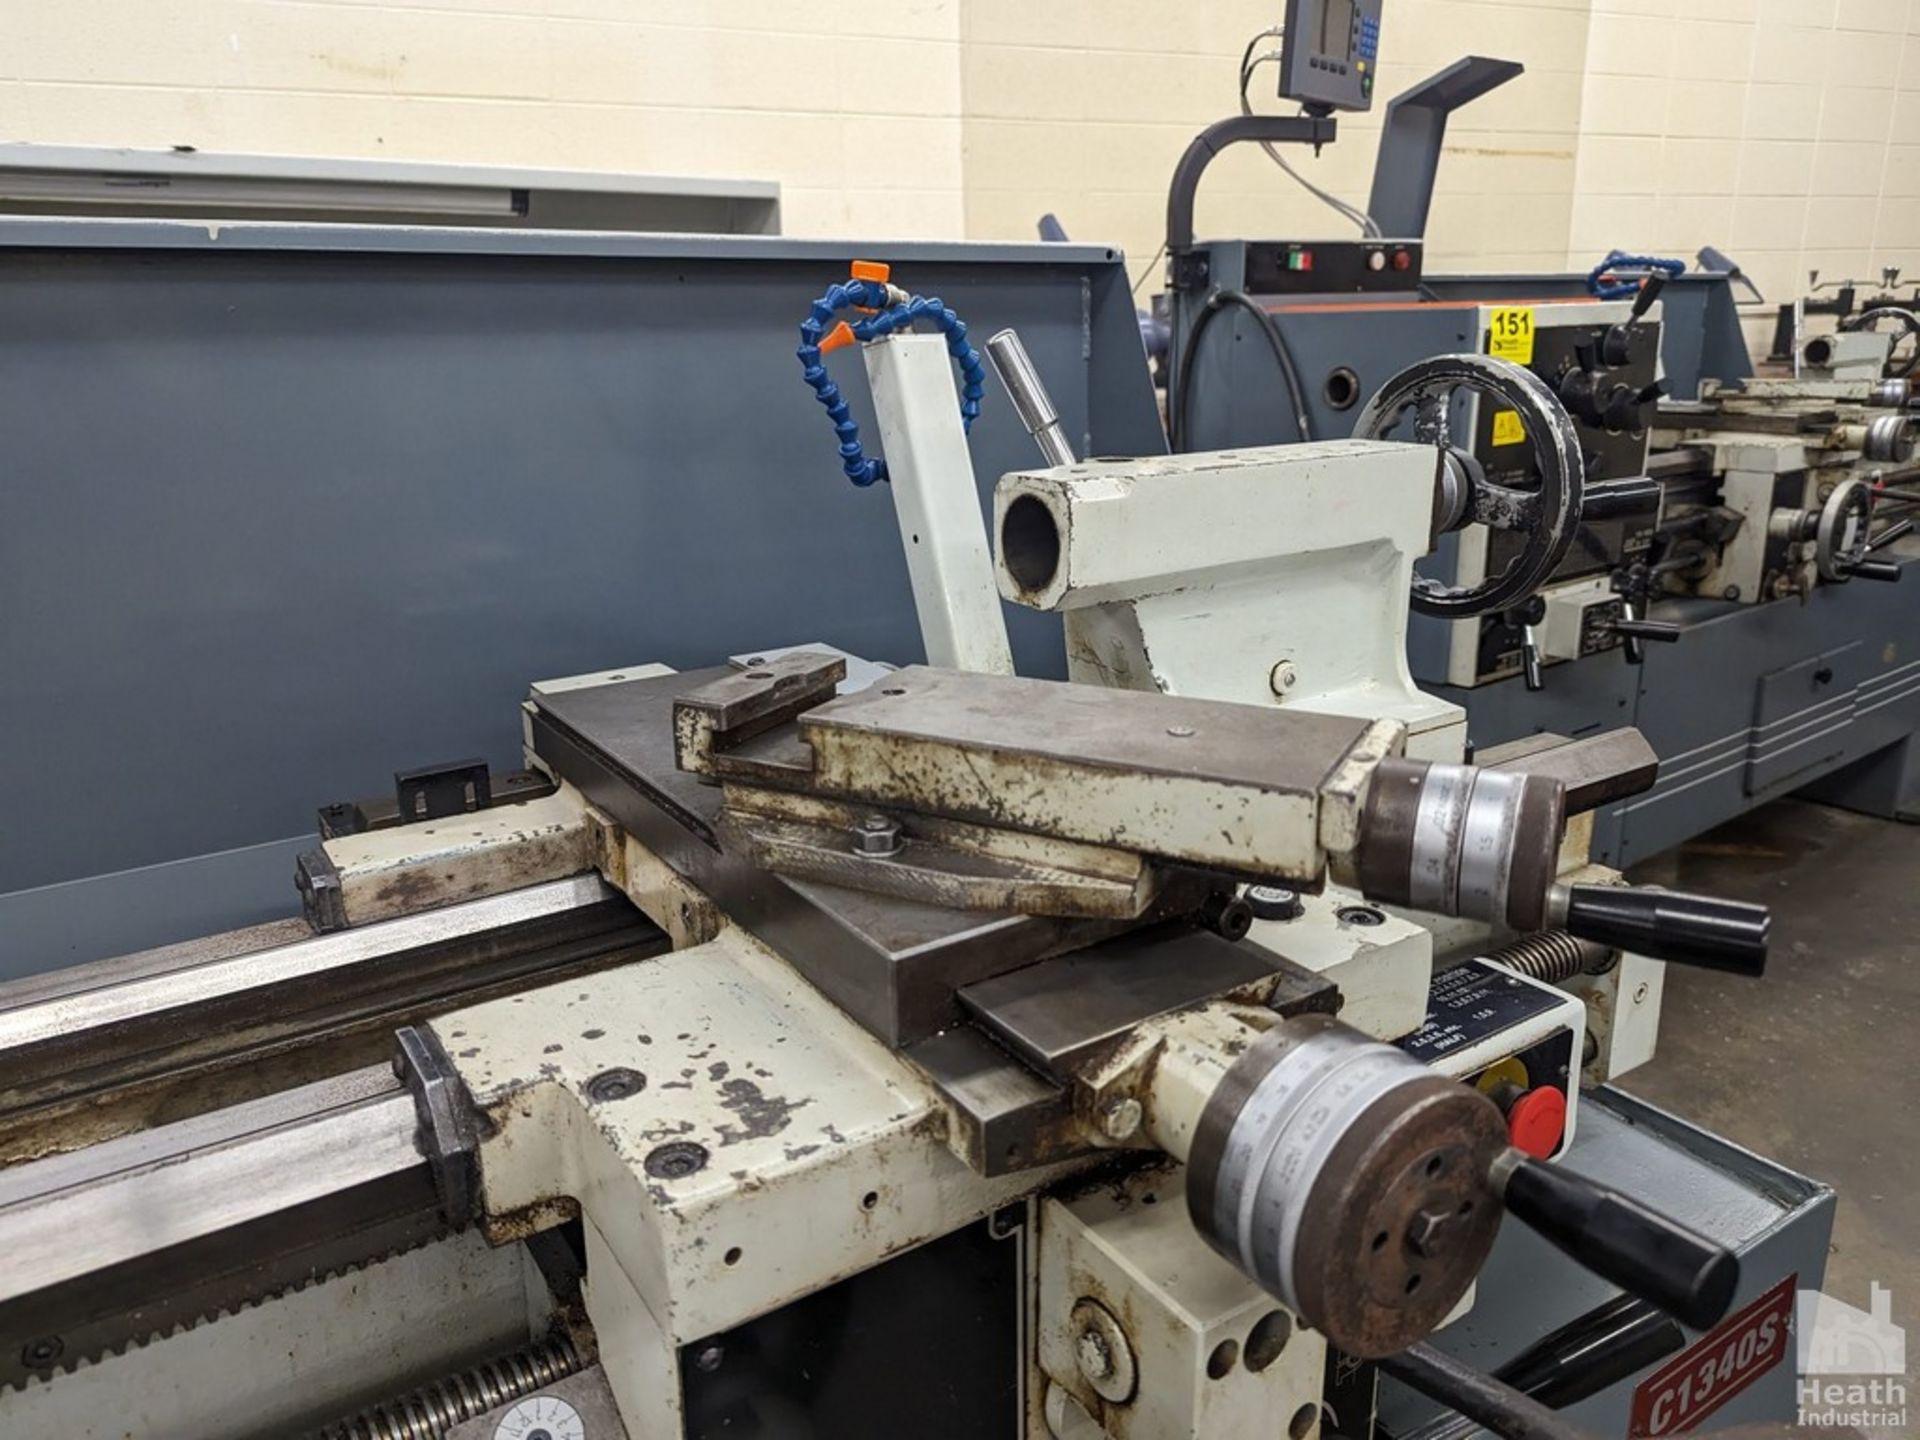 CLAUSING-METOSA 13"X40" MODEL 1340S TOOLROOM LATHE, S/N 41538, 2500 SPINDLE RPM, WITH TAPER - Image 6 of 7